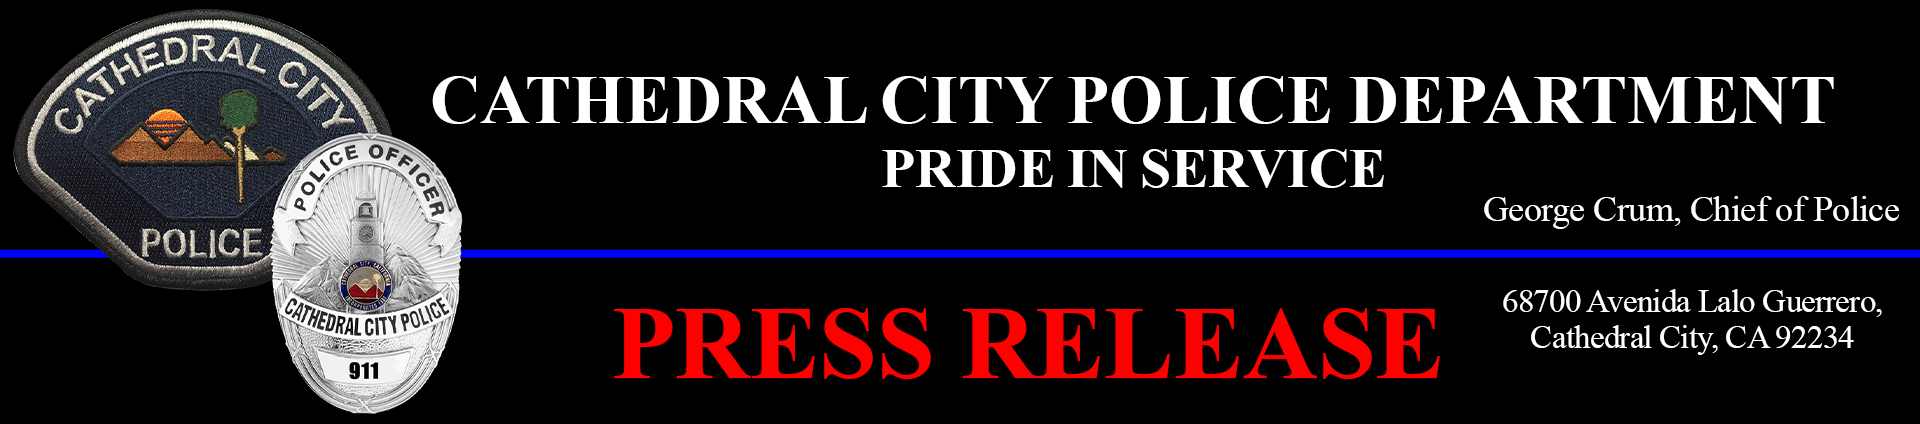 Press Release TC 2308-3878 - Cathedral City Police Department